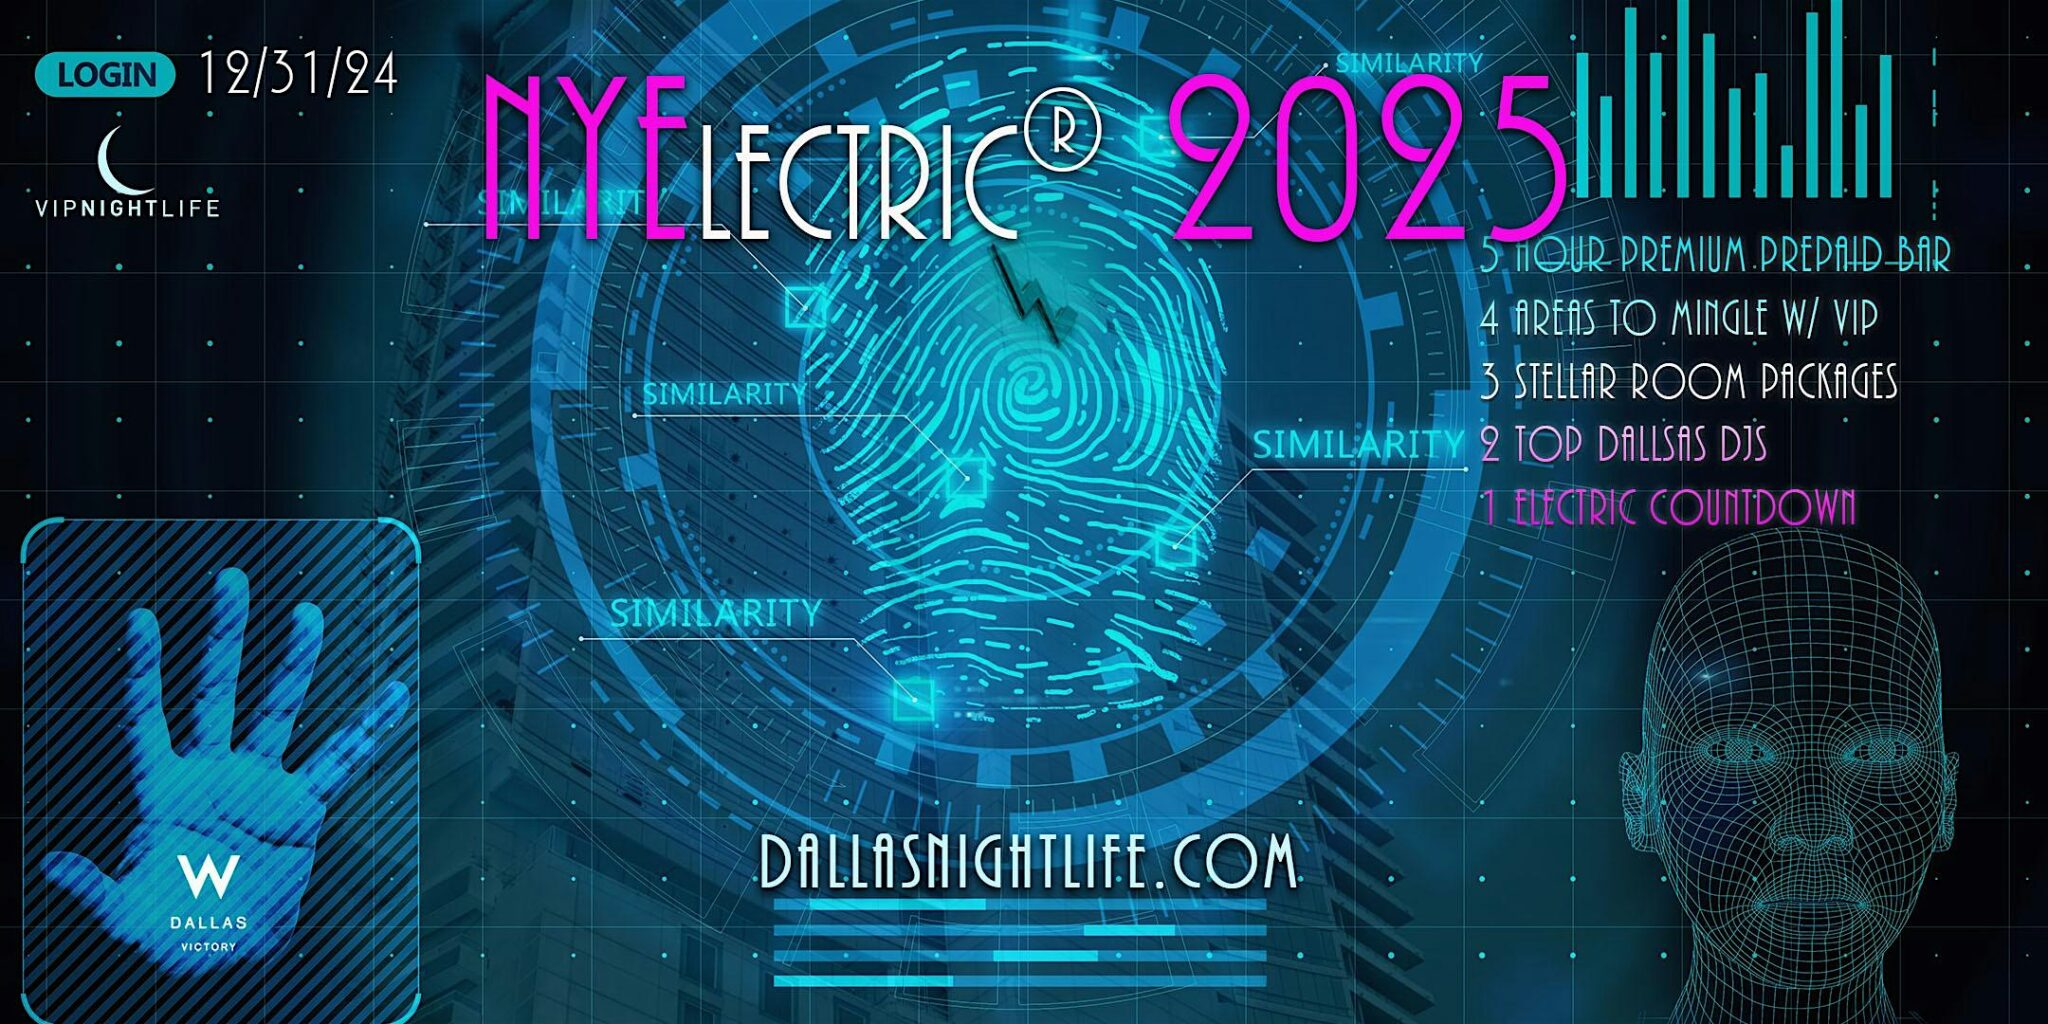 NYElectric W Dallas Rooftop New Years Eve Party 2025 VIP Nightlife